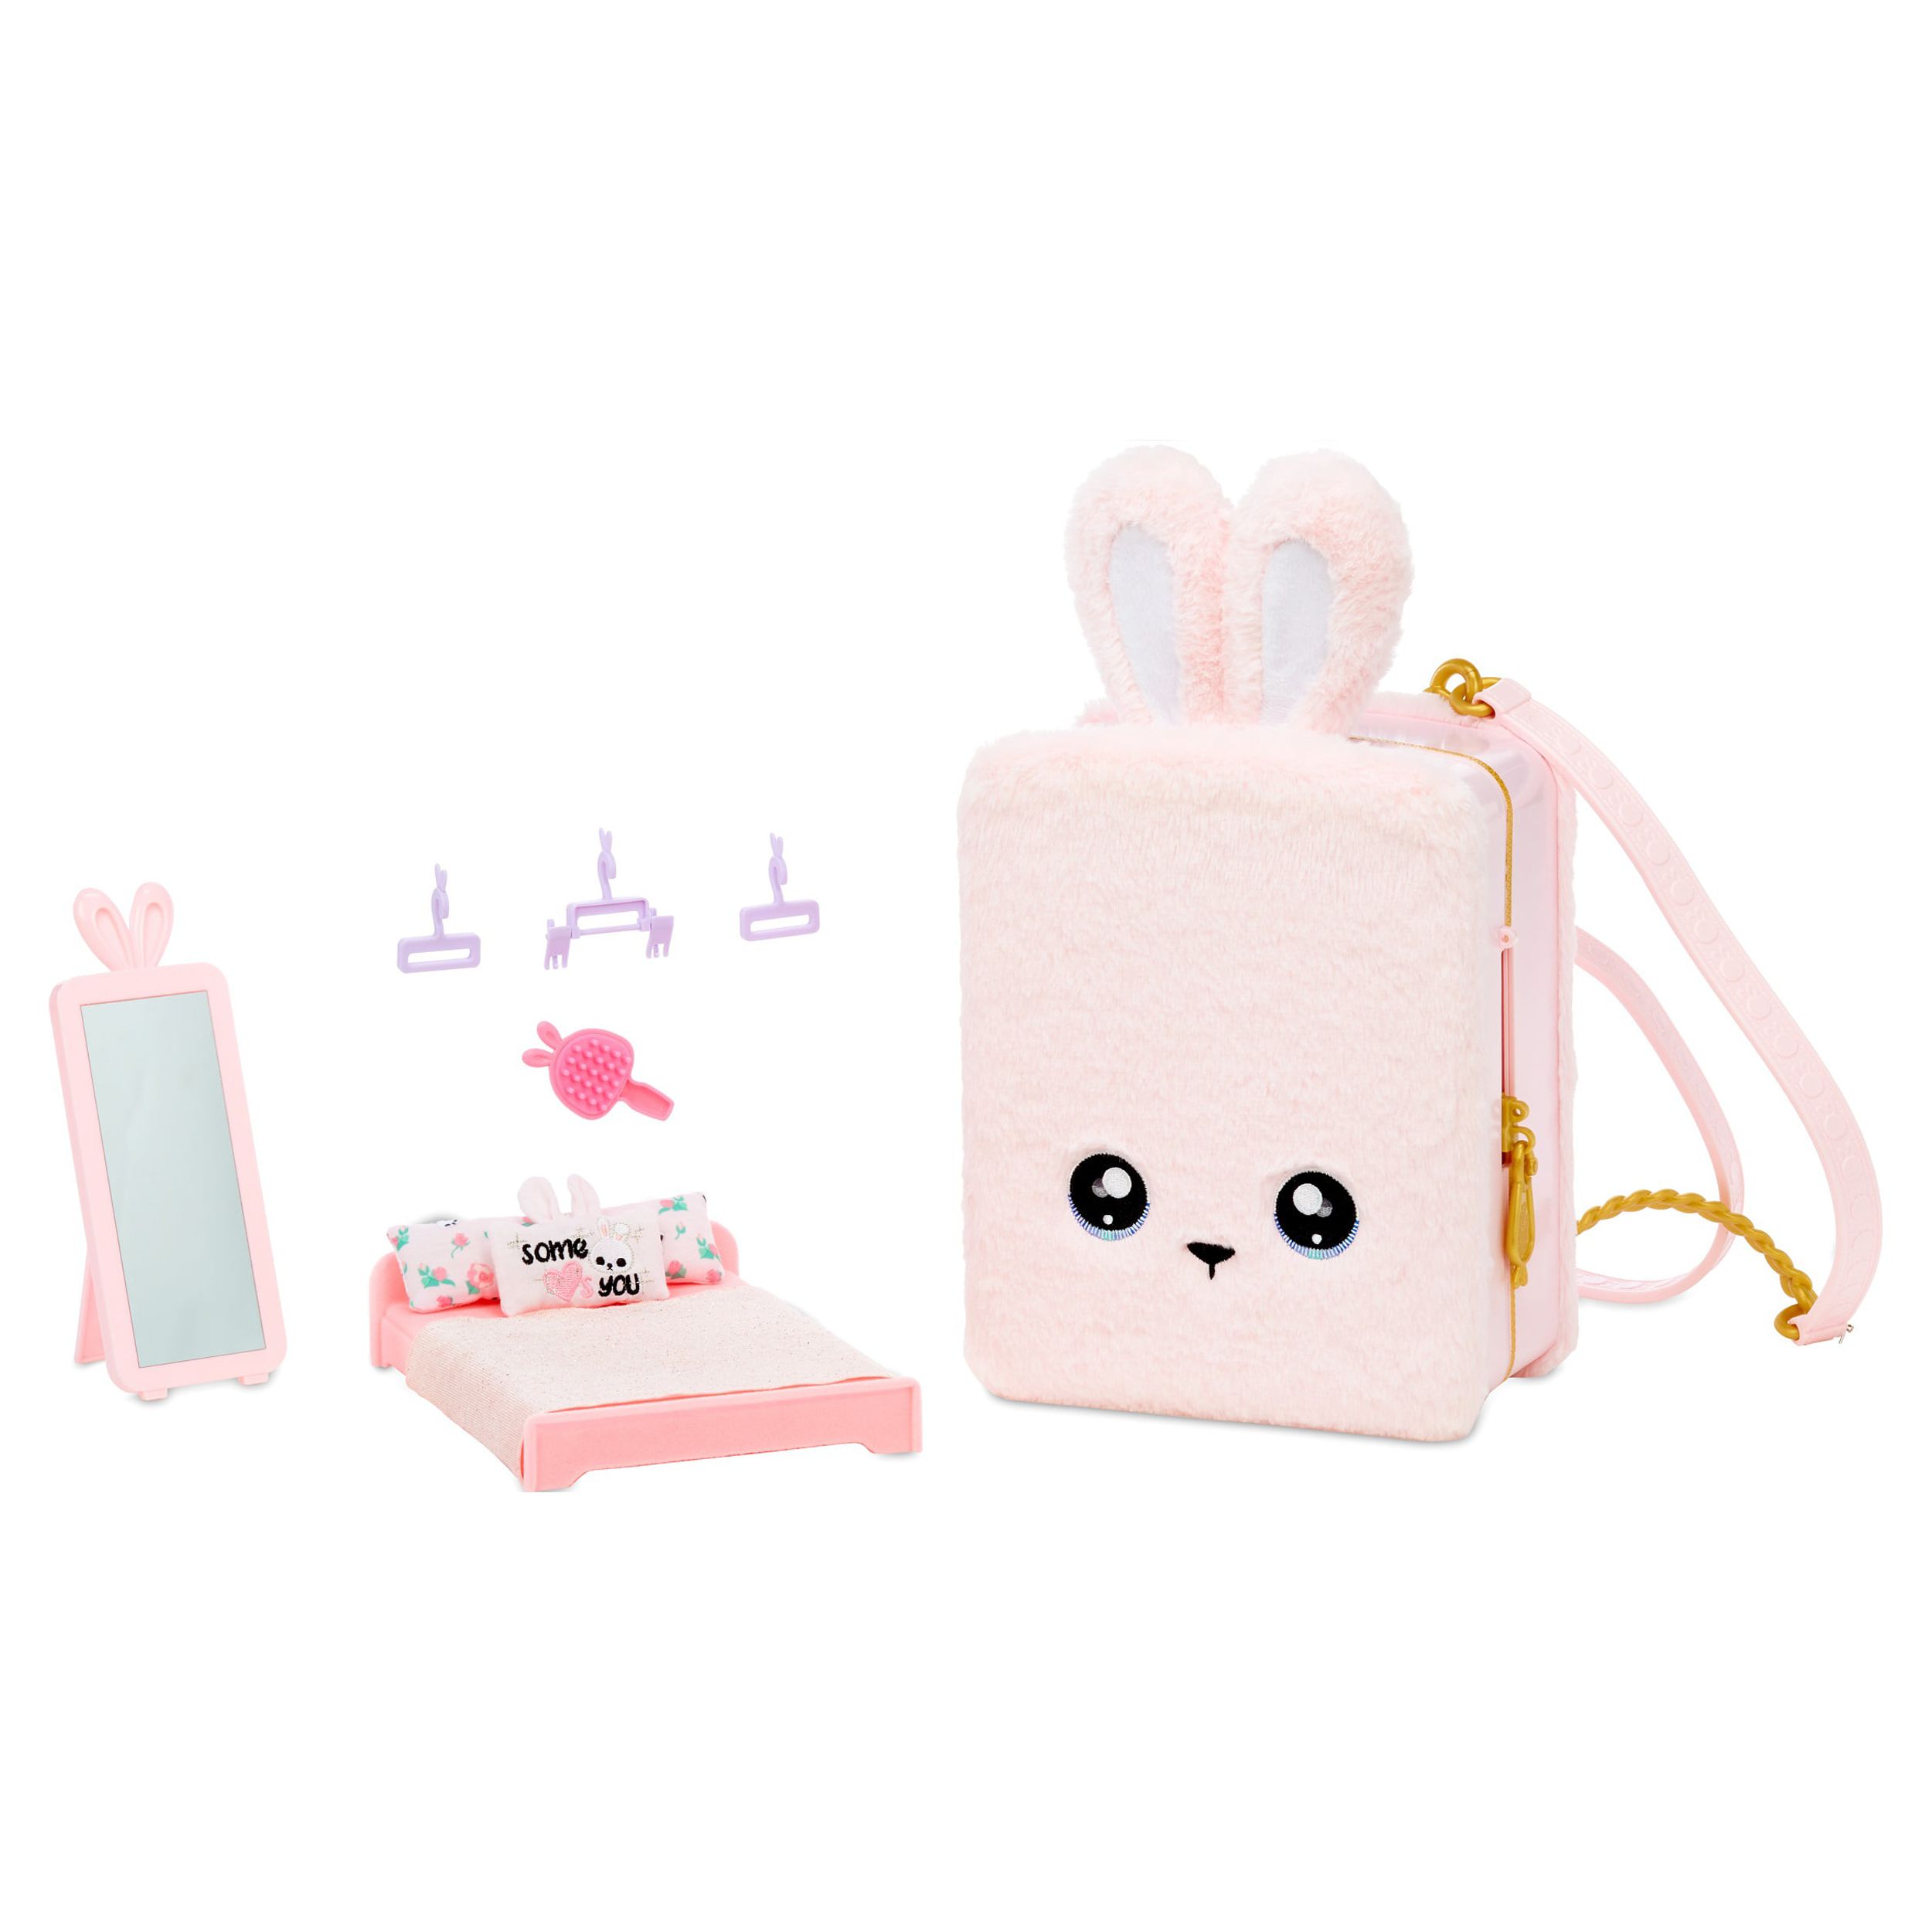 Na! Na! Na! Surprise 3-in-1 Backpack Bedroom Pink Bunny Playset with Limited Edition Doll Playset - image 4 of 5